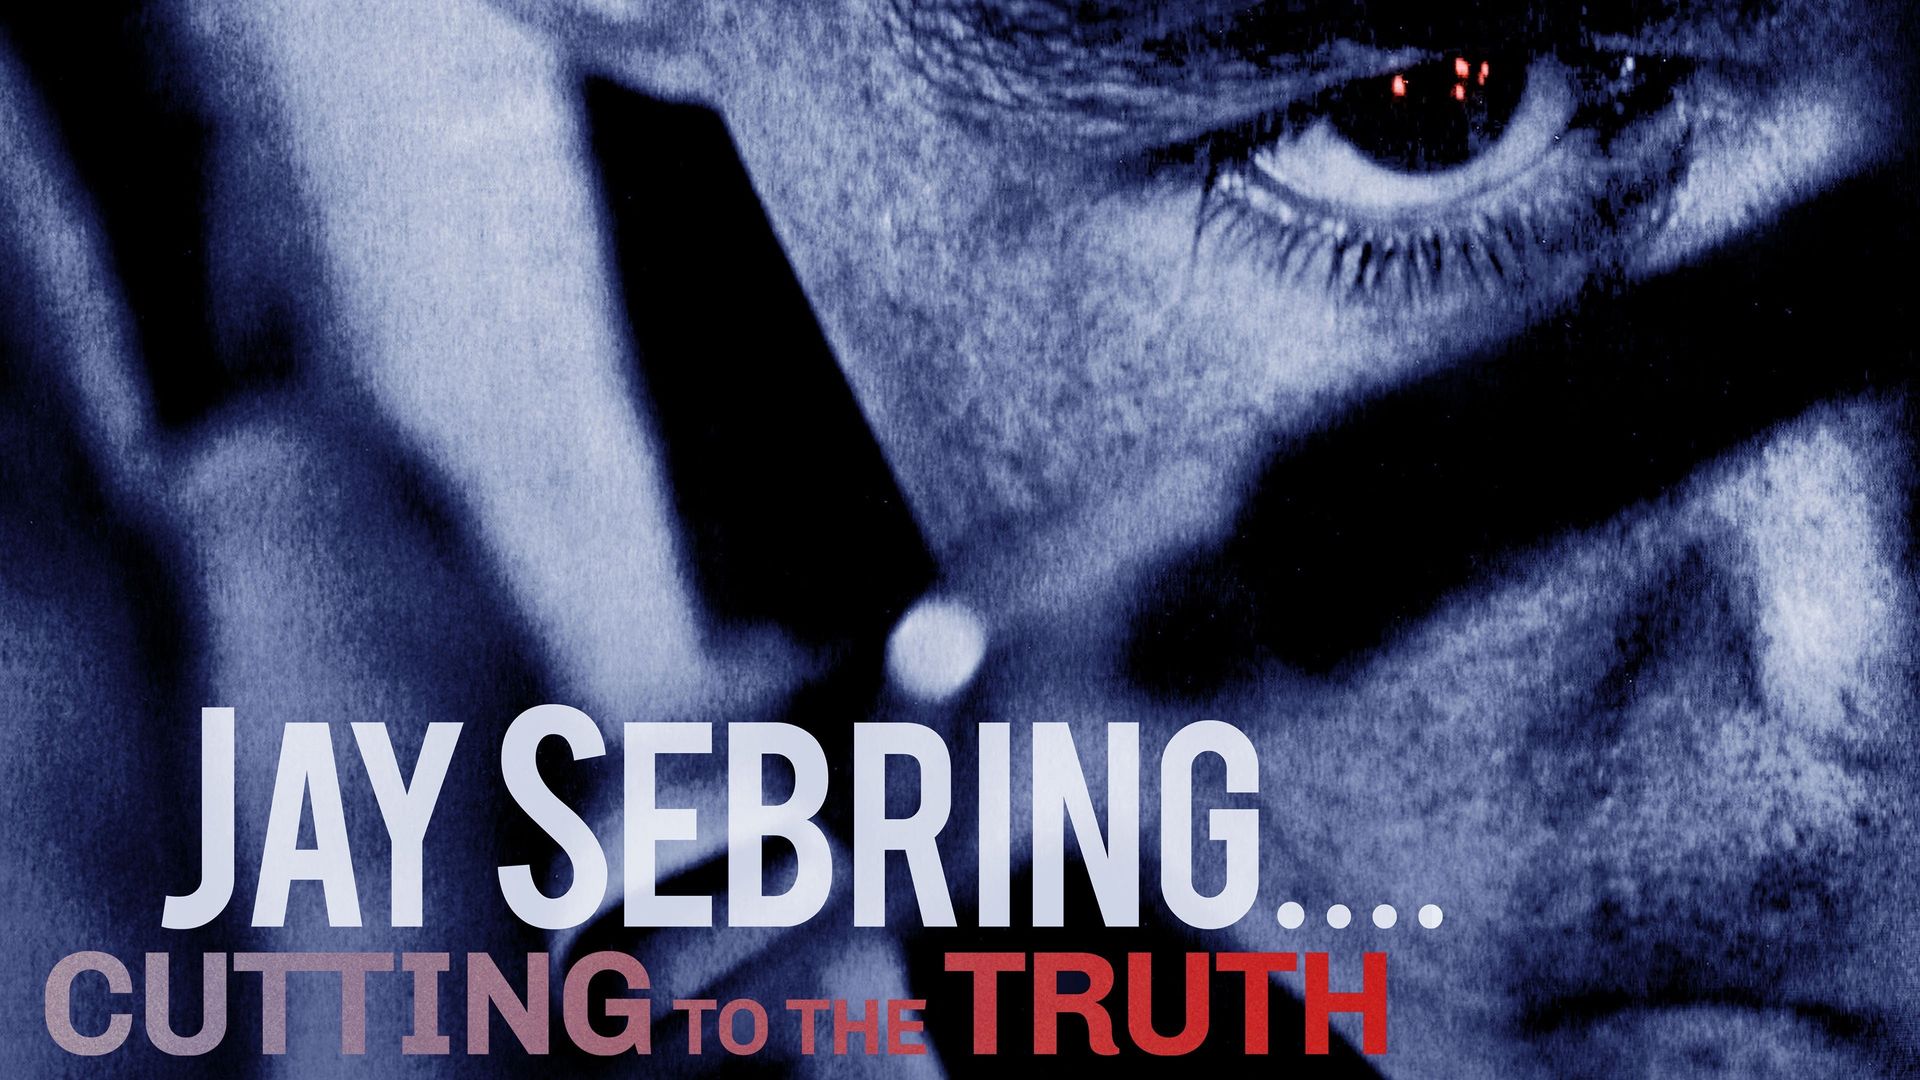 Jay Sebring.... Cutting to the Truth Backdrop